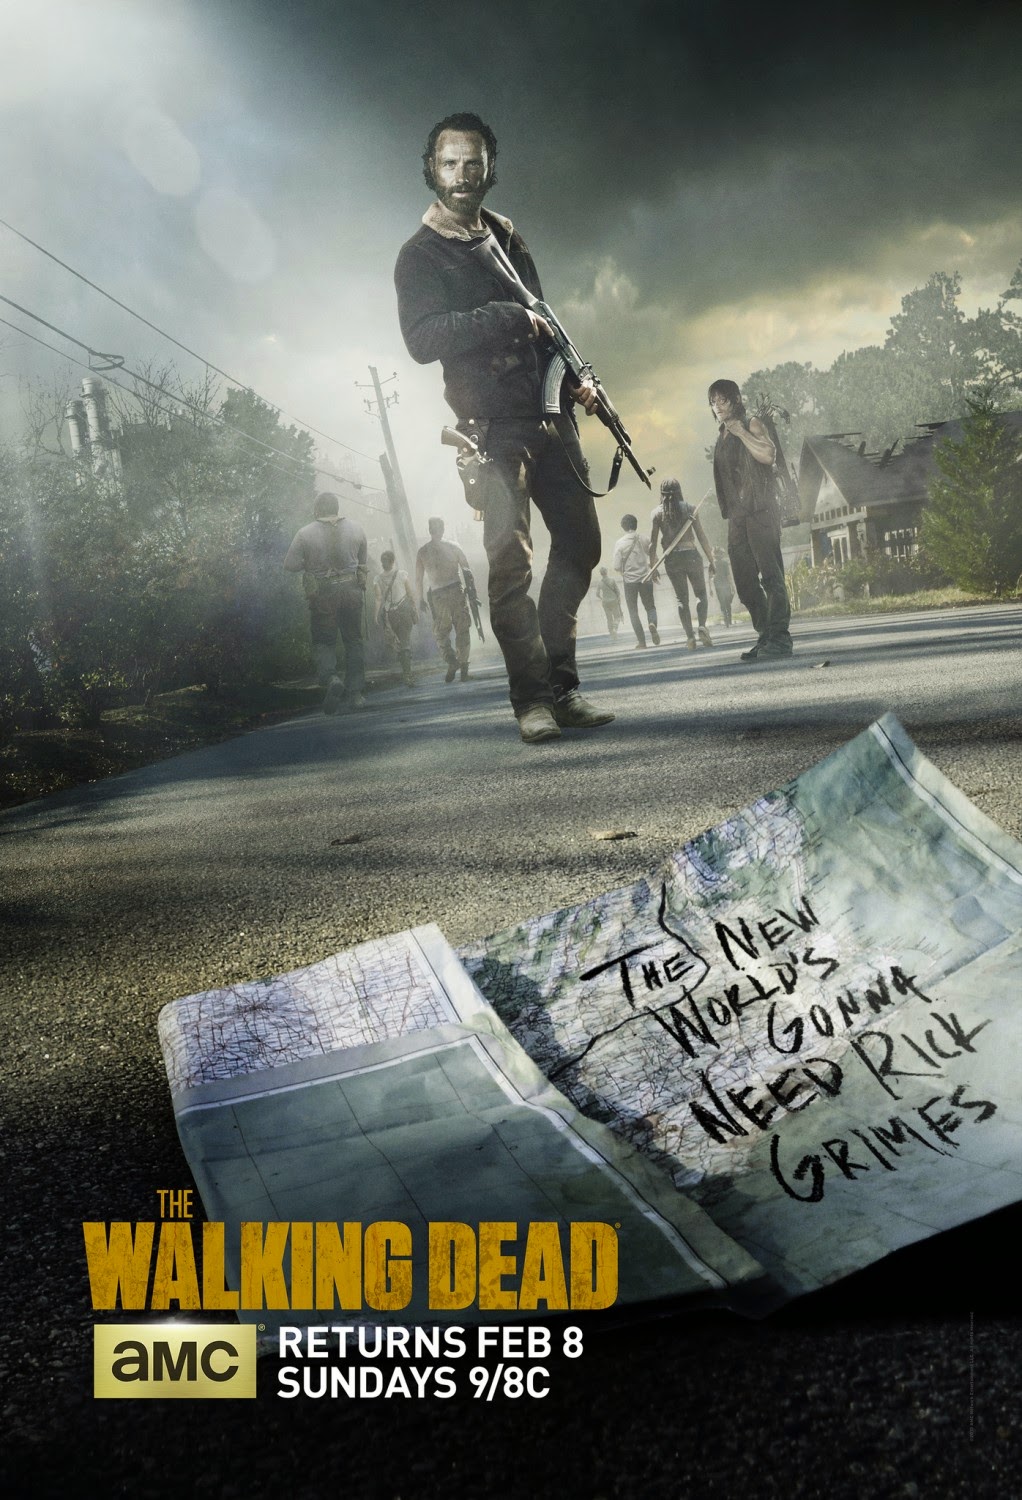 The Walking Dead Season 5, Part II One Sheet Television Poster